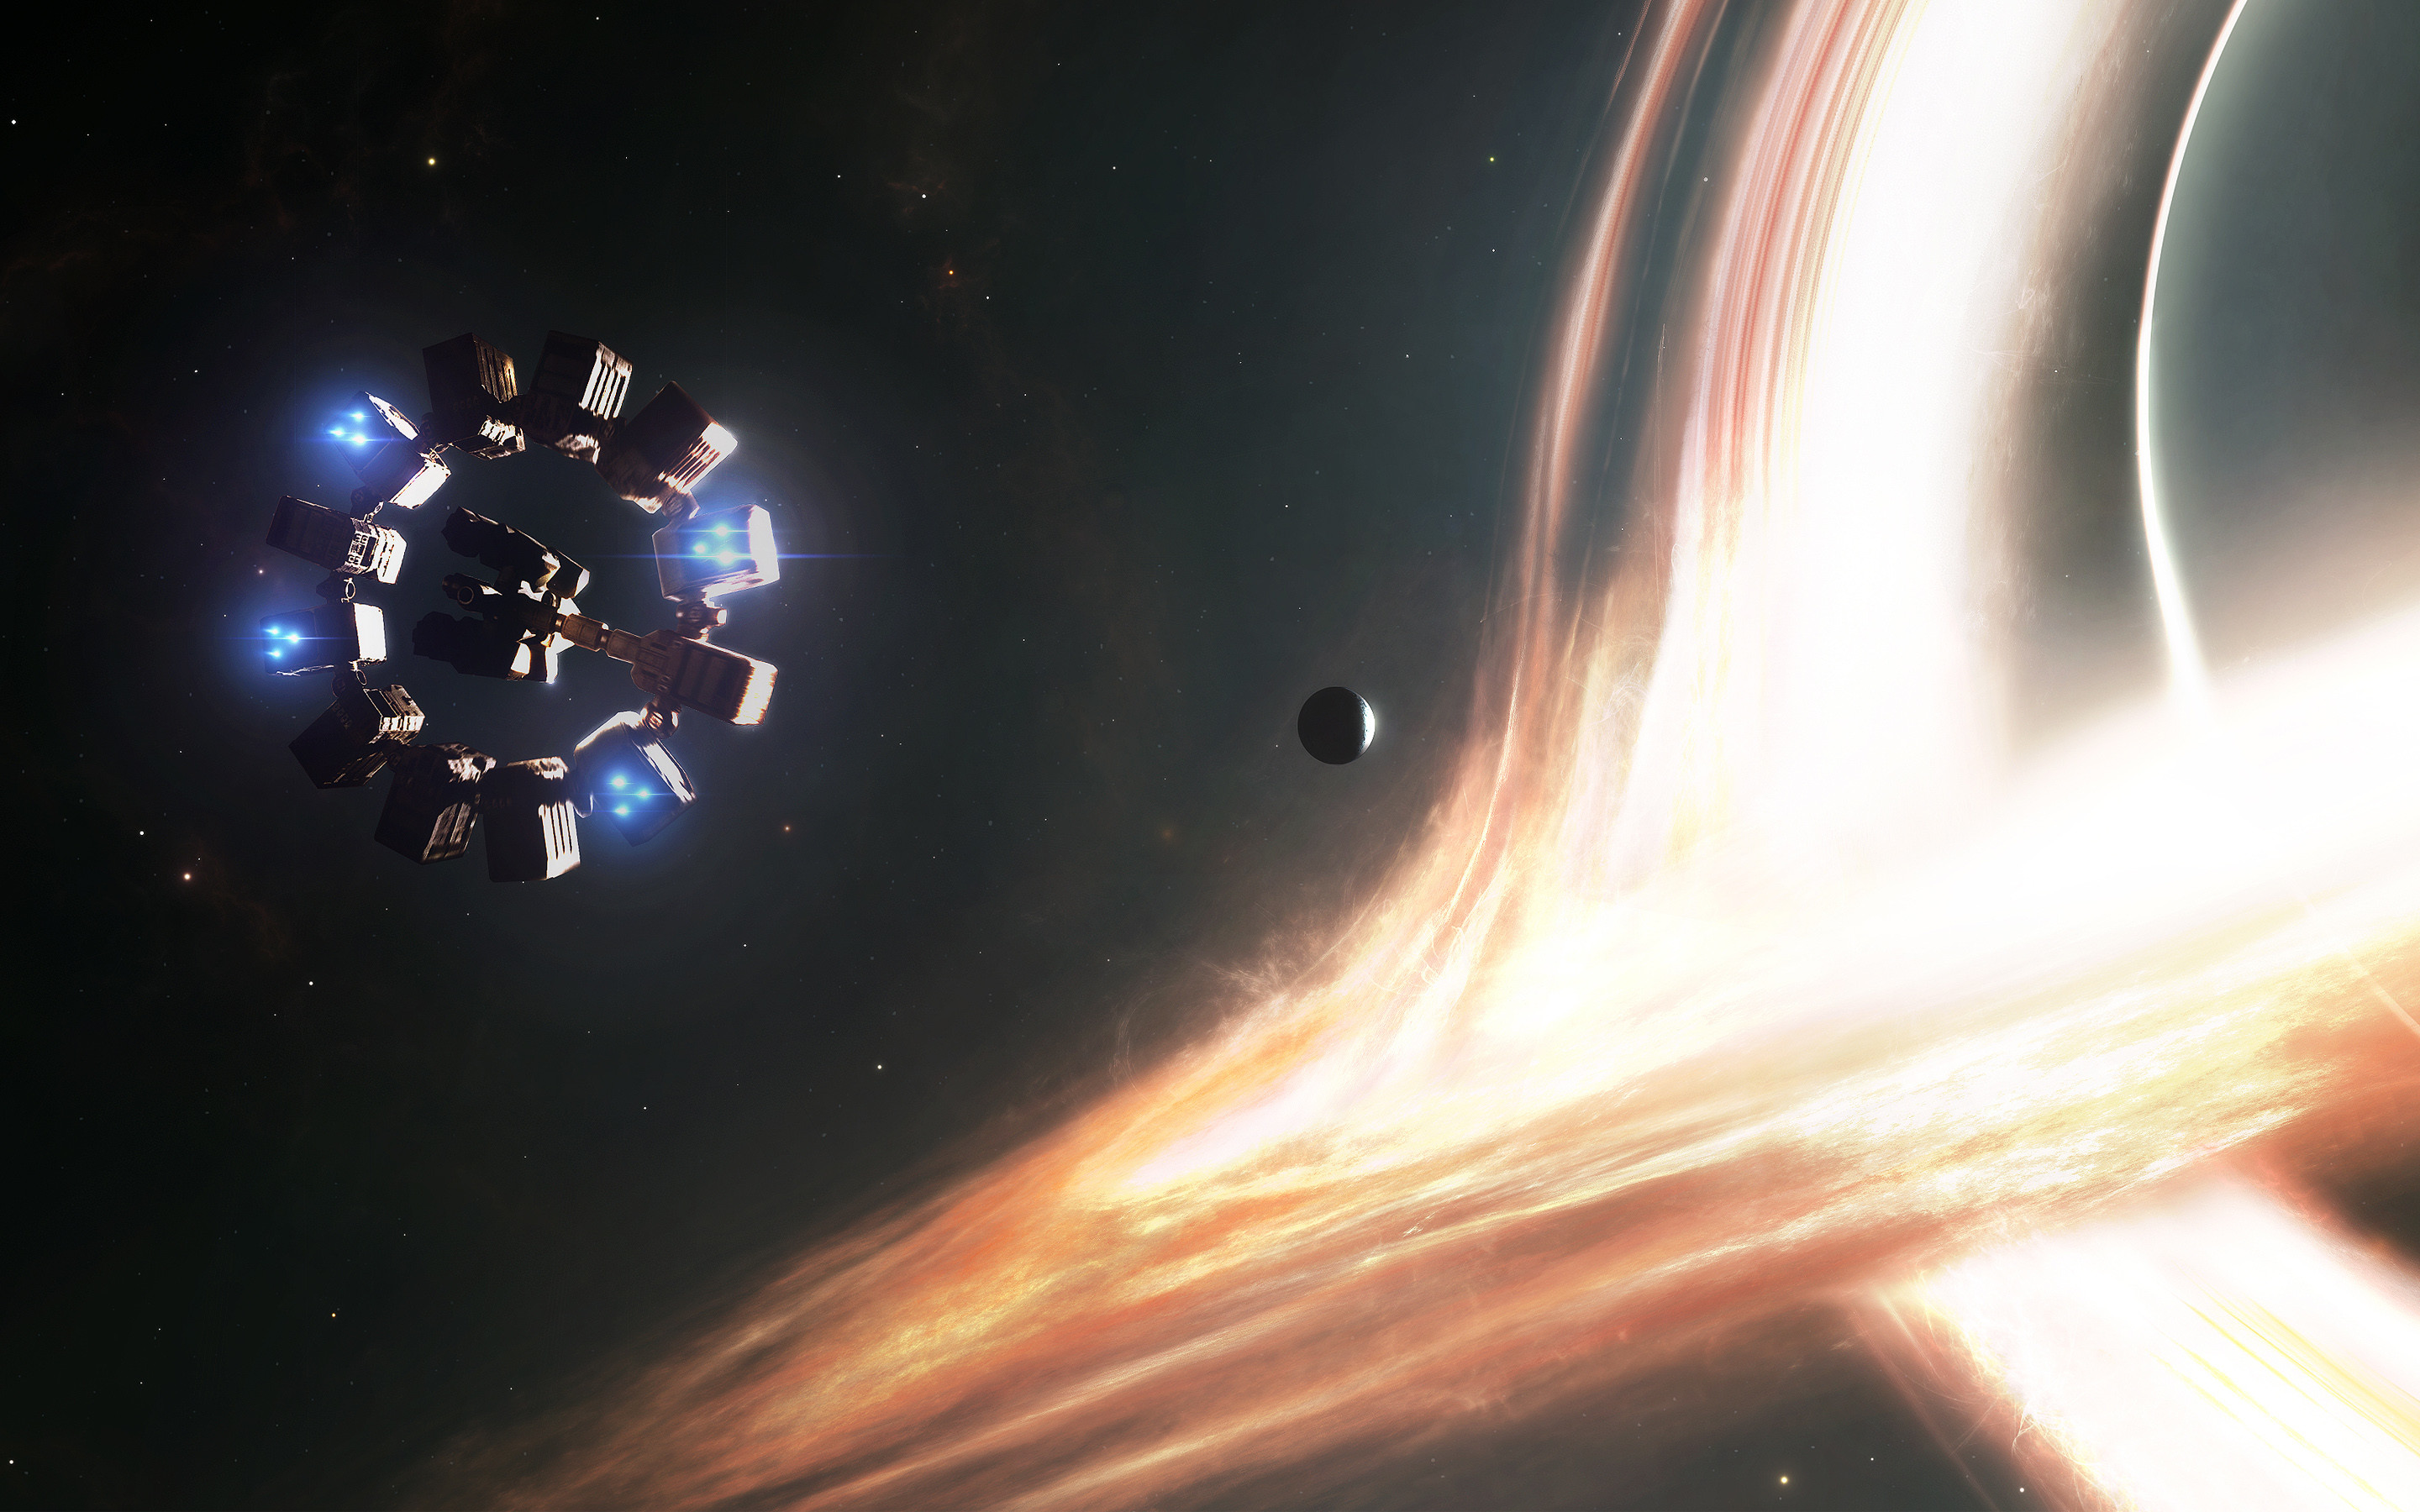 2880x1800 here's another of my favorites from Interstellar